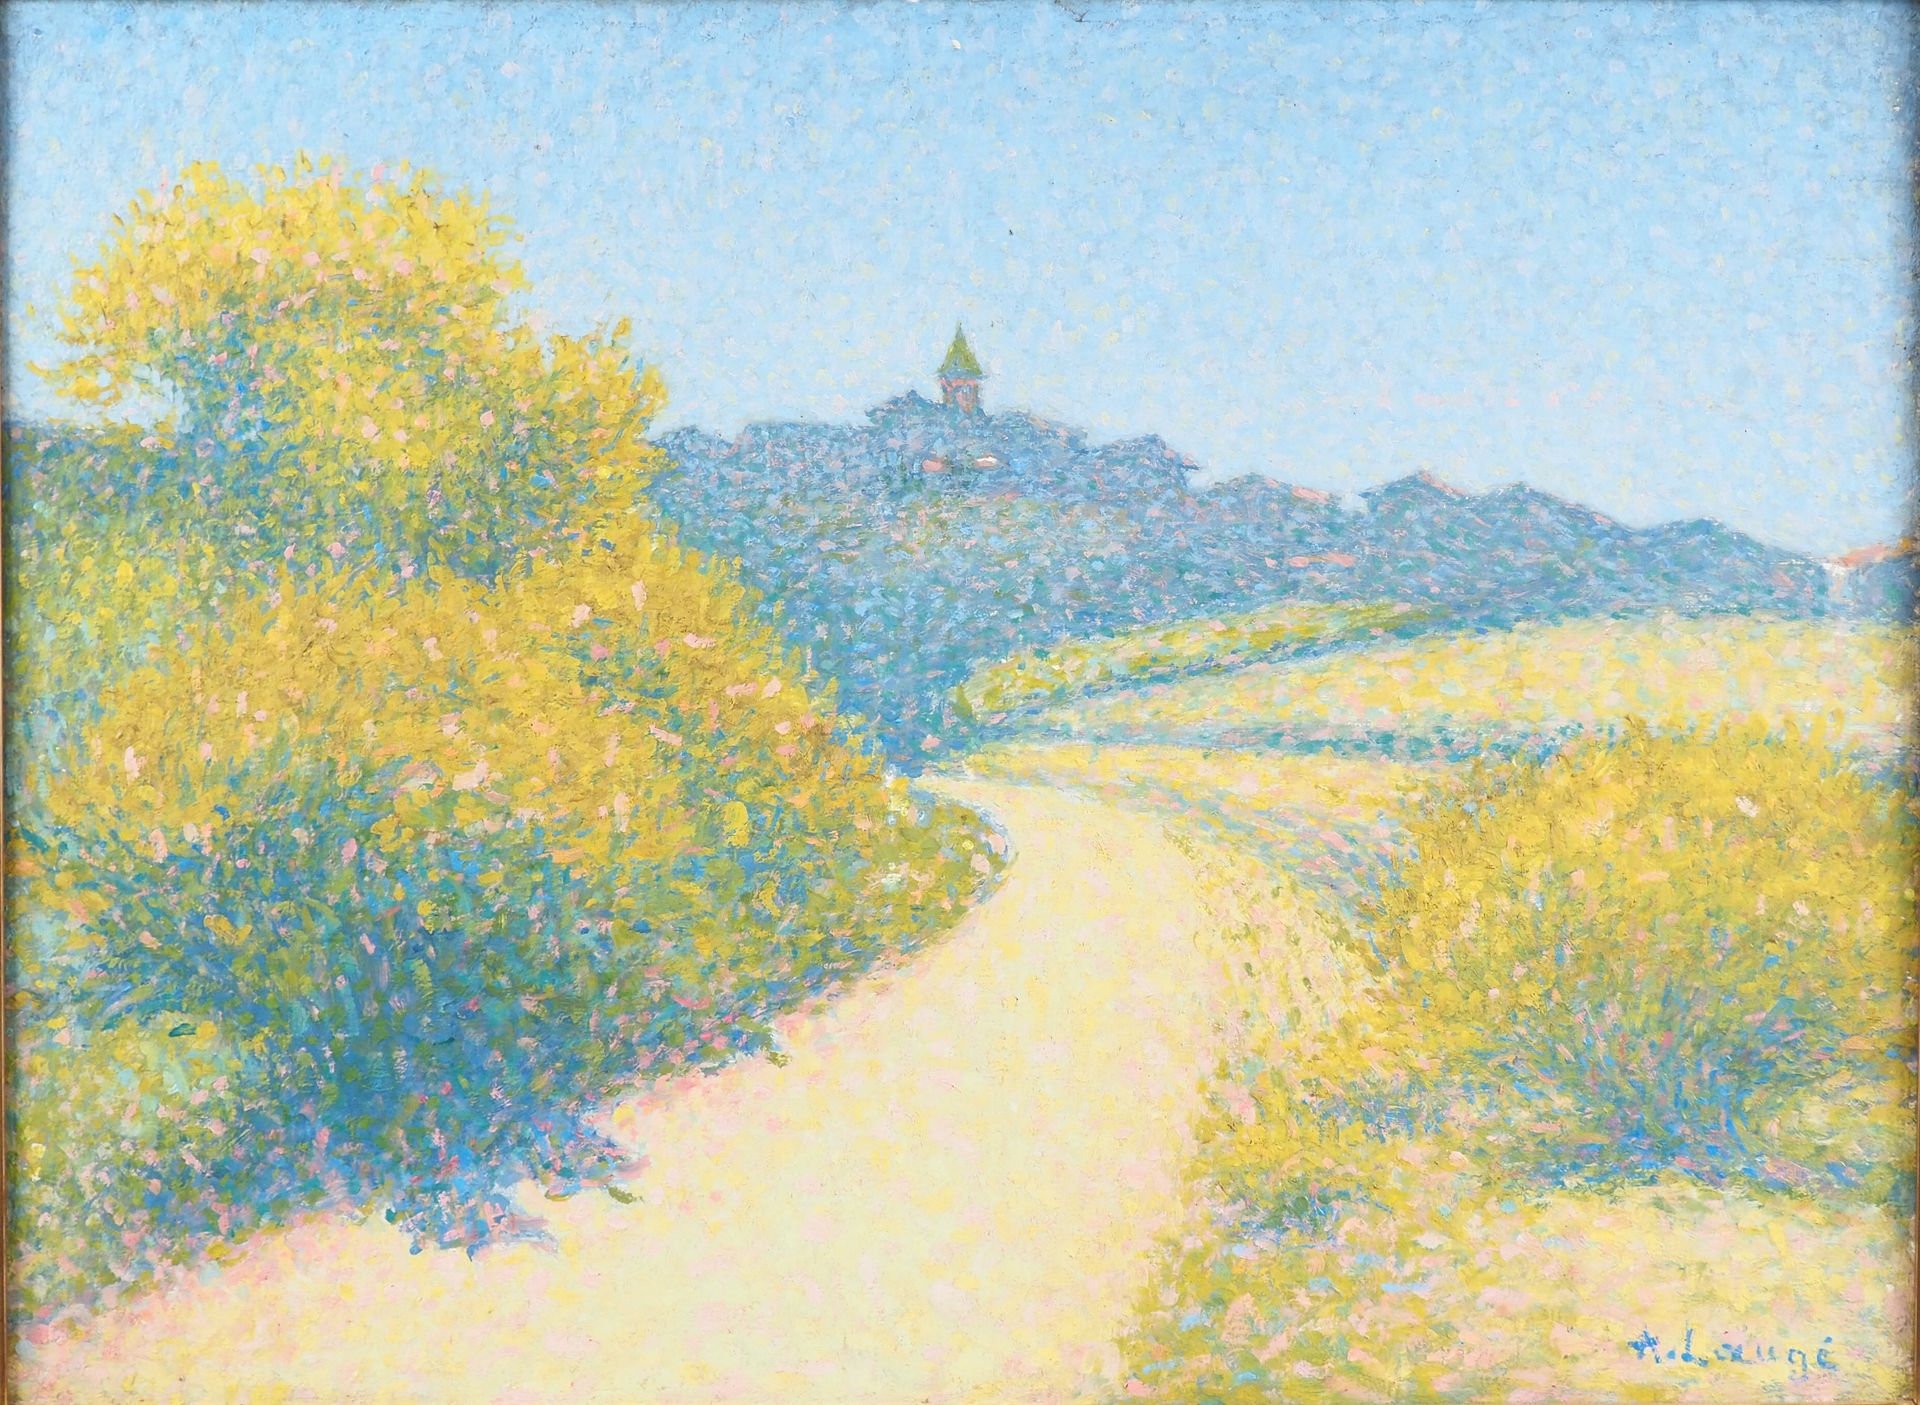 Null A. LAUGE. 

"Road to the brooms towards Cailhau".

Oil on canvas. Circa 192&hellip;